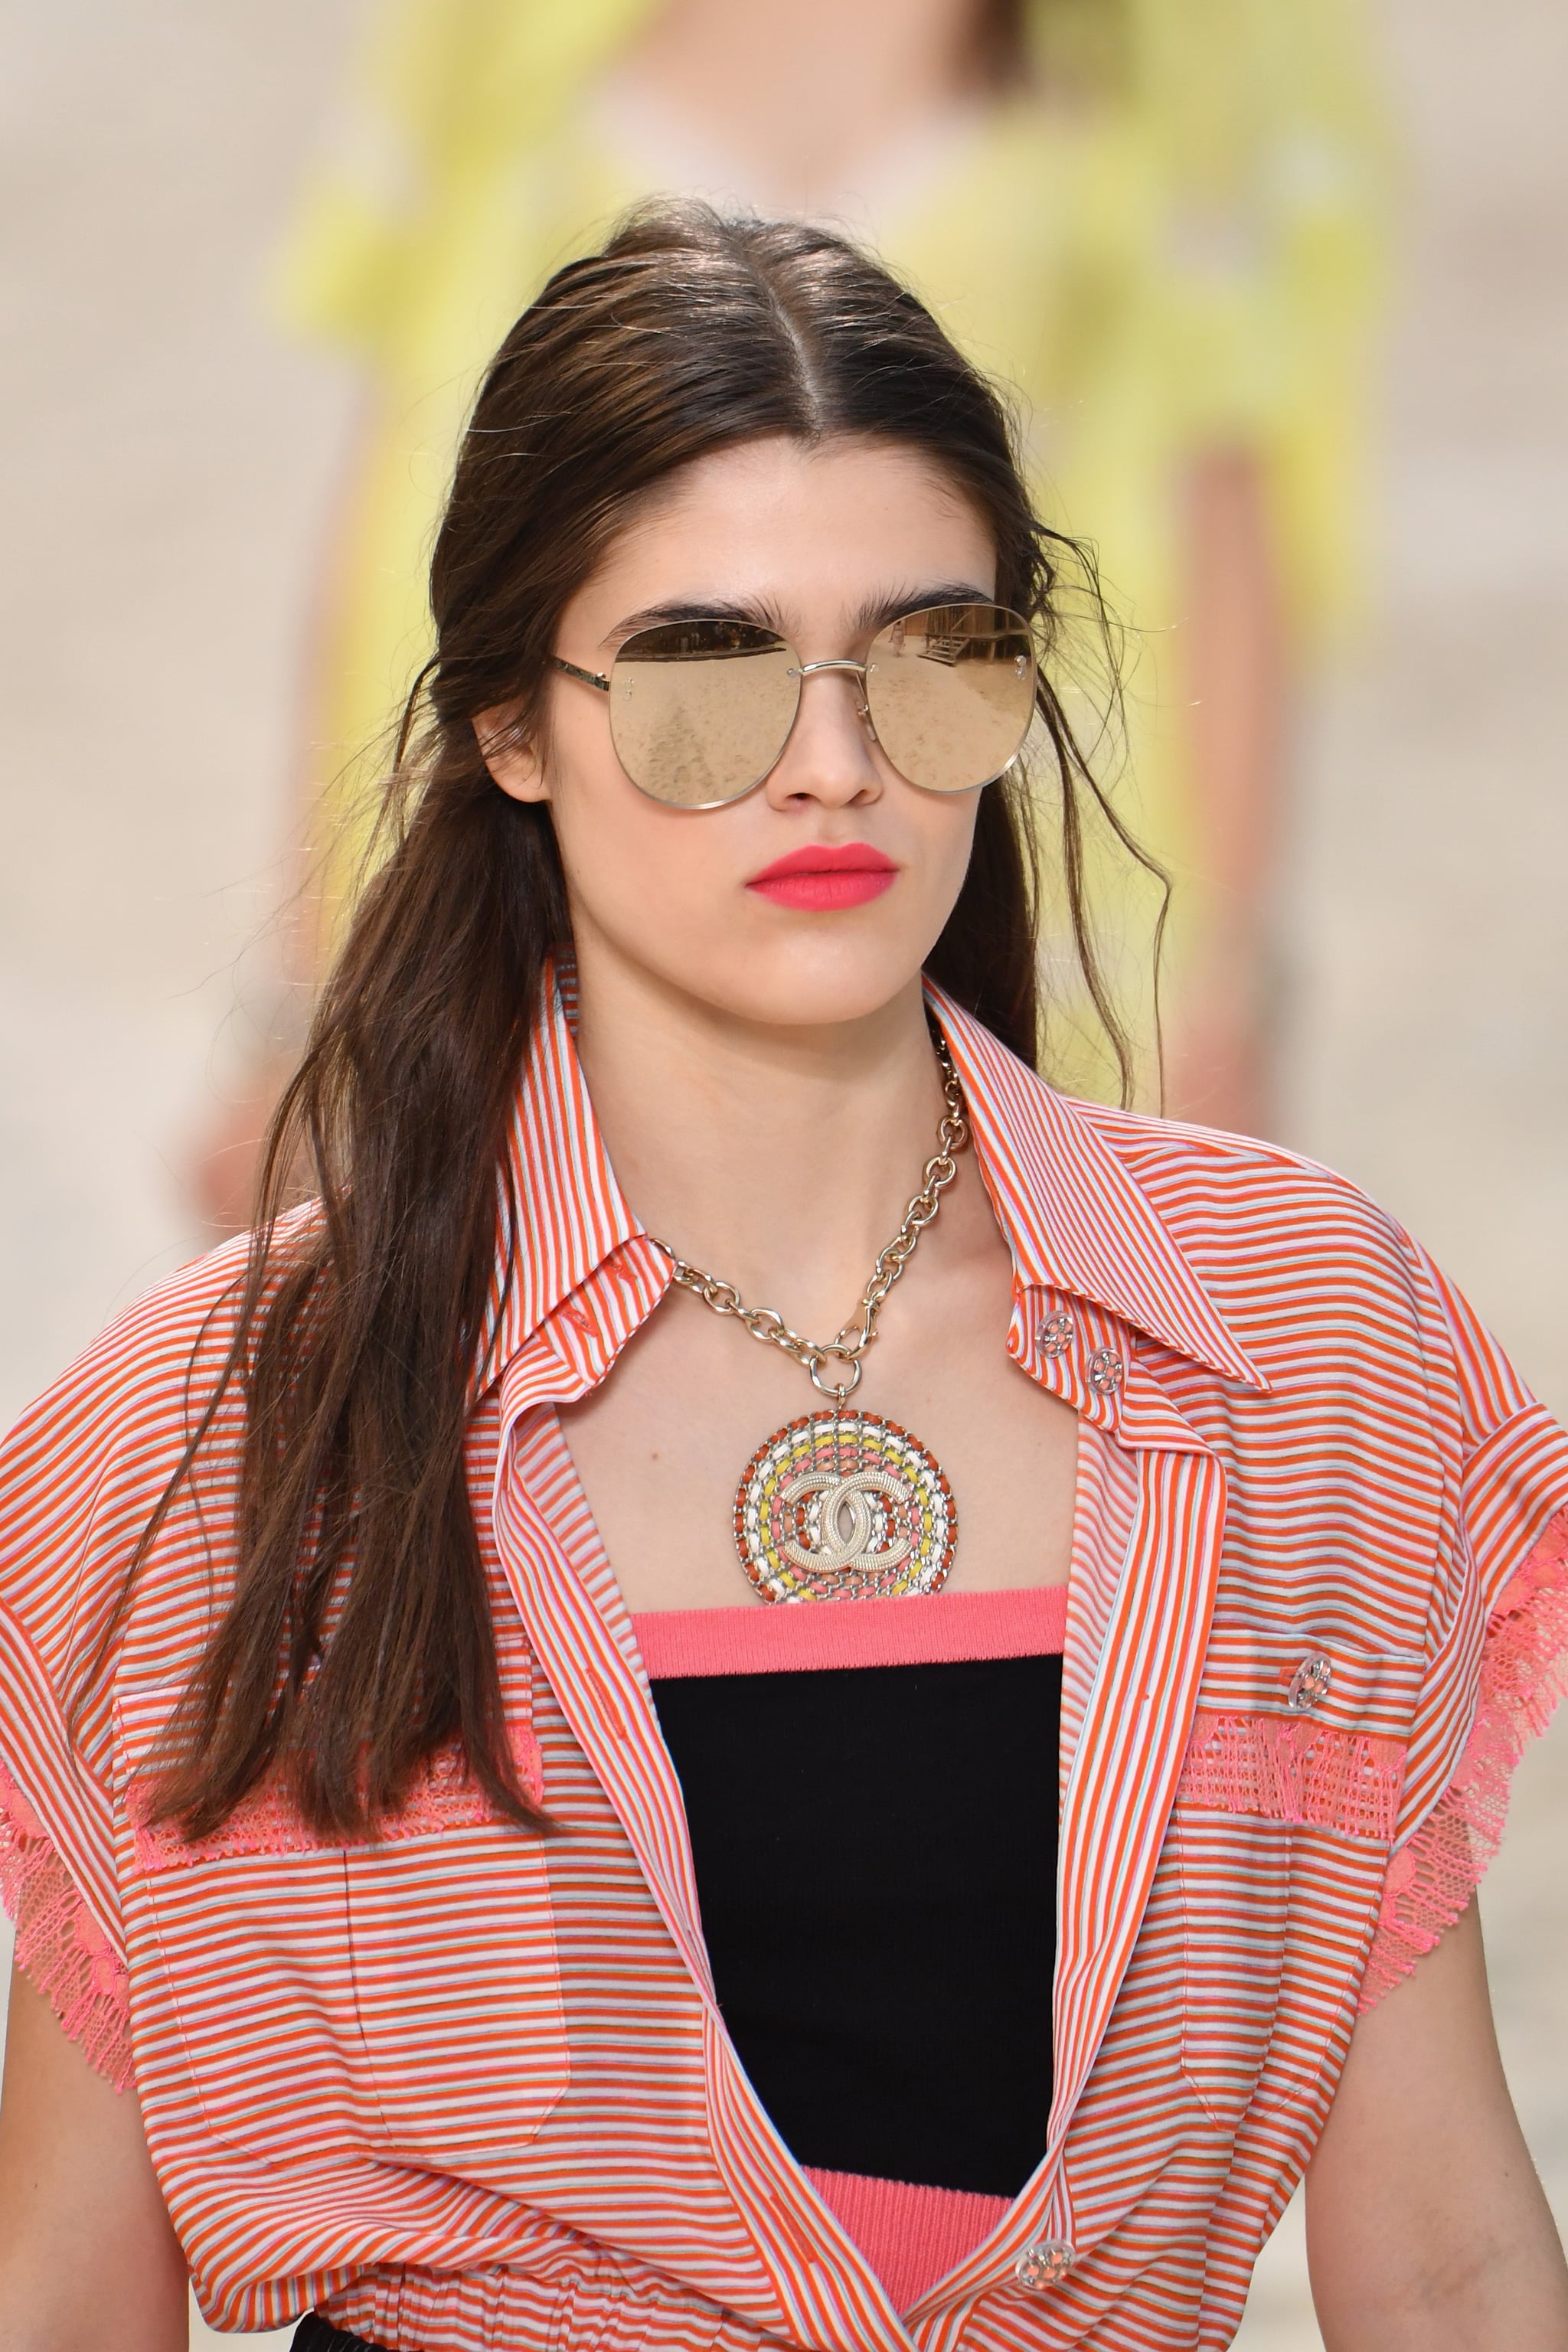 CHANEL on X: Model Blesnya Minher wears sunglasses surrounded by